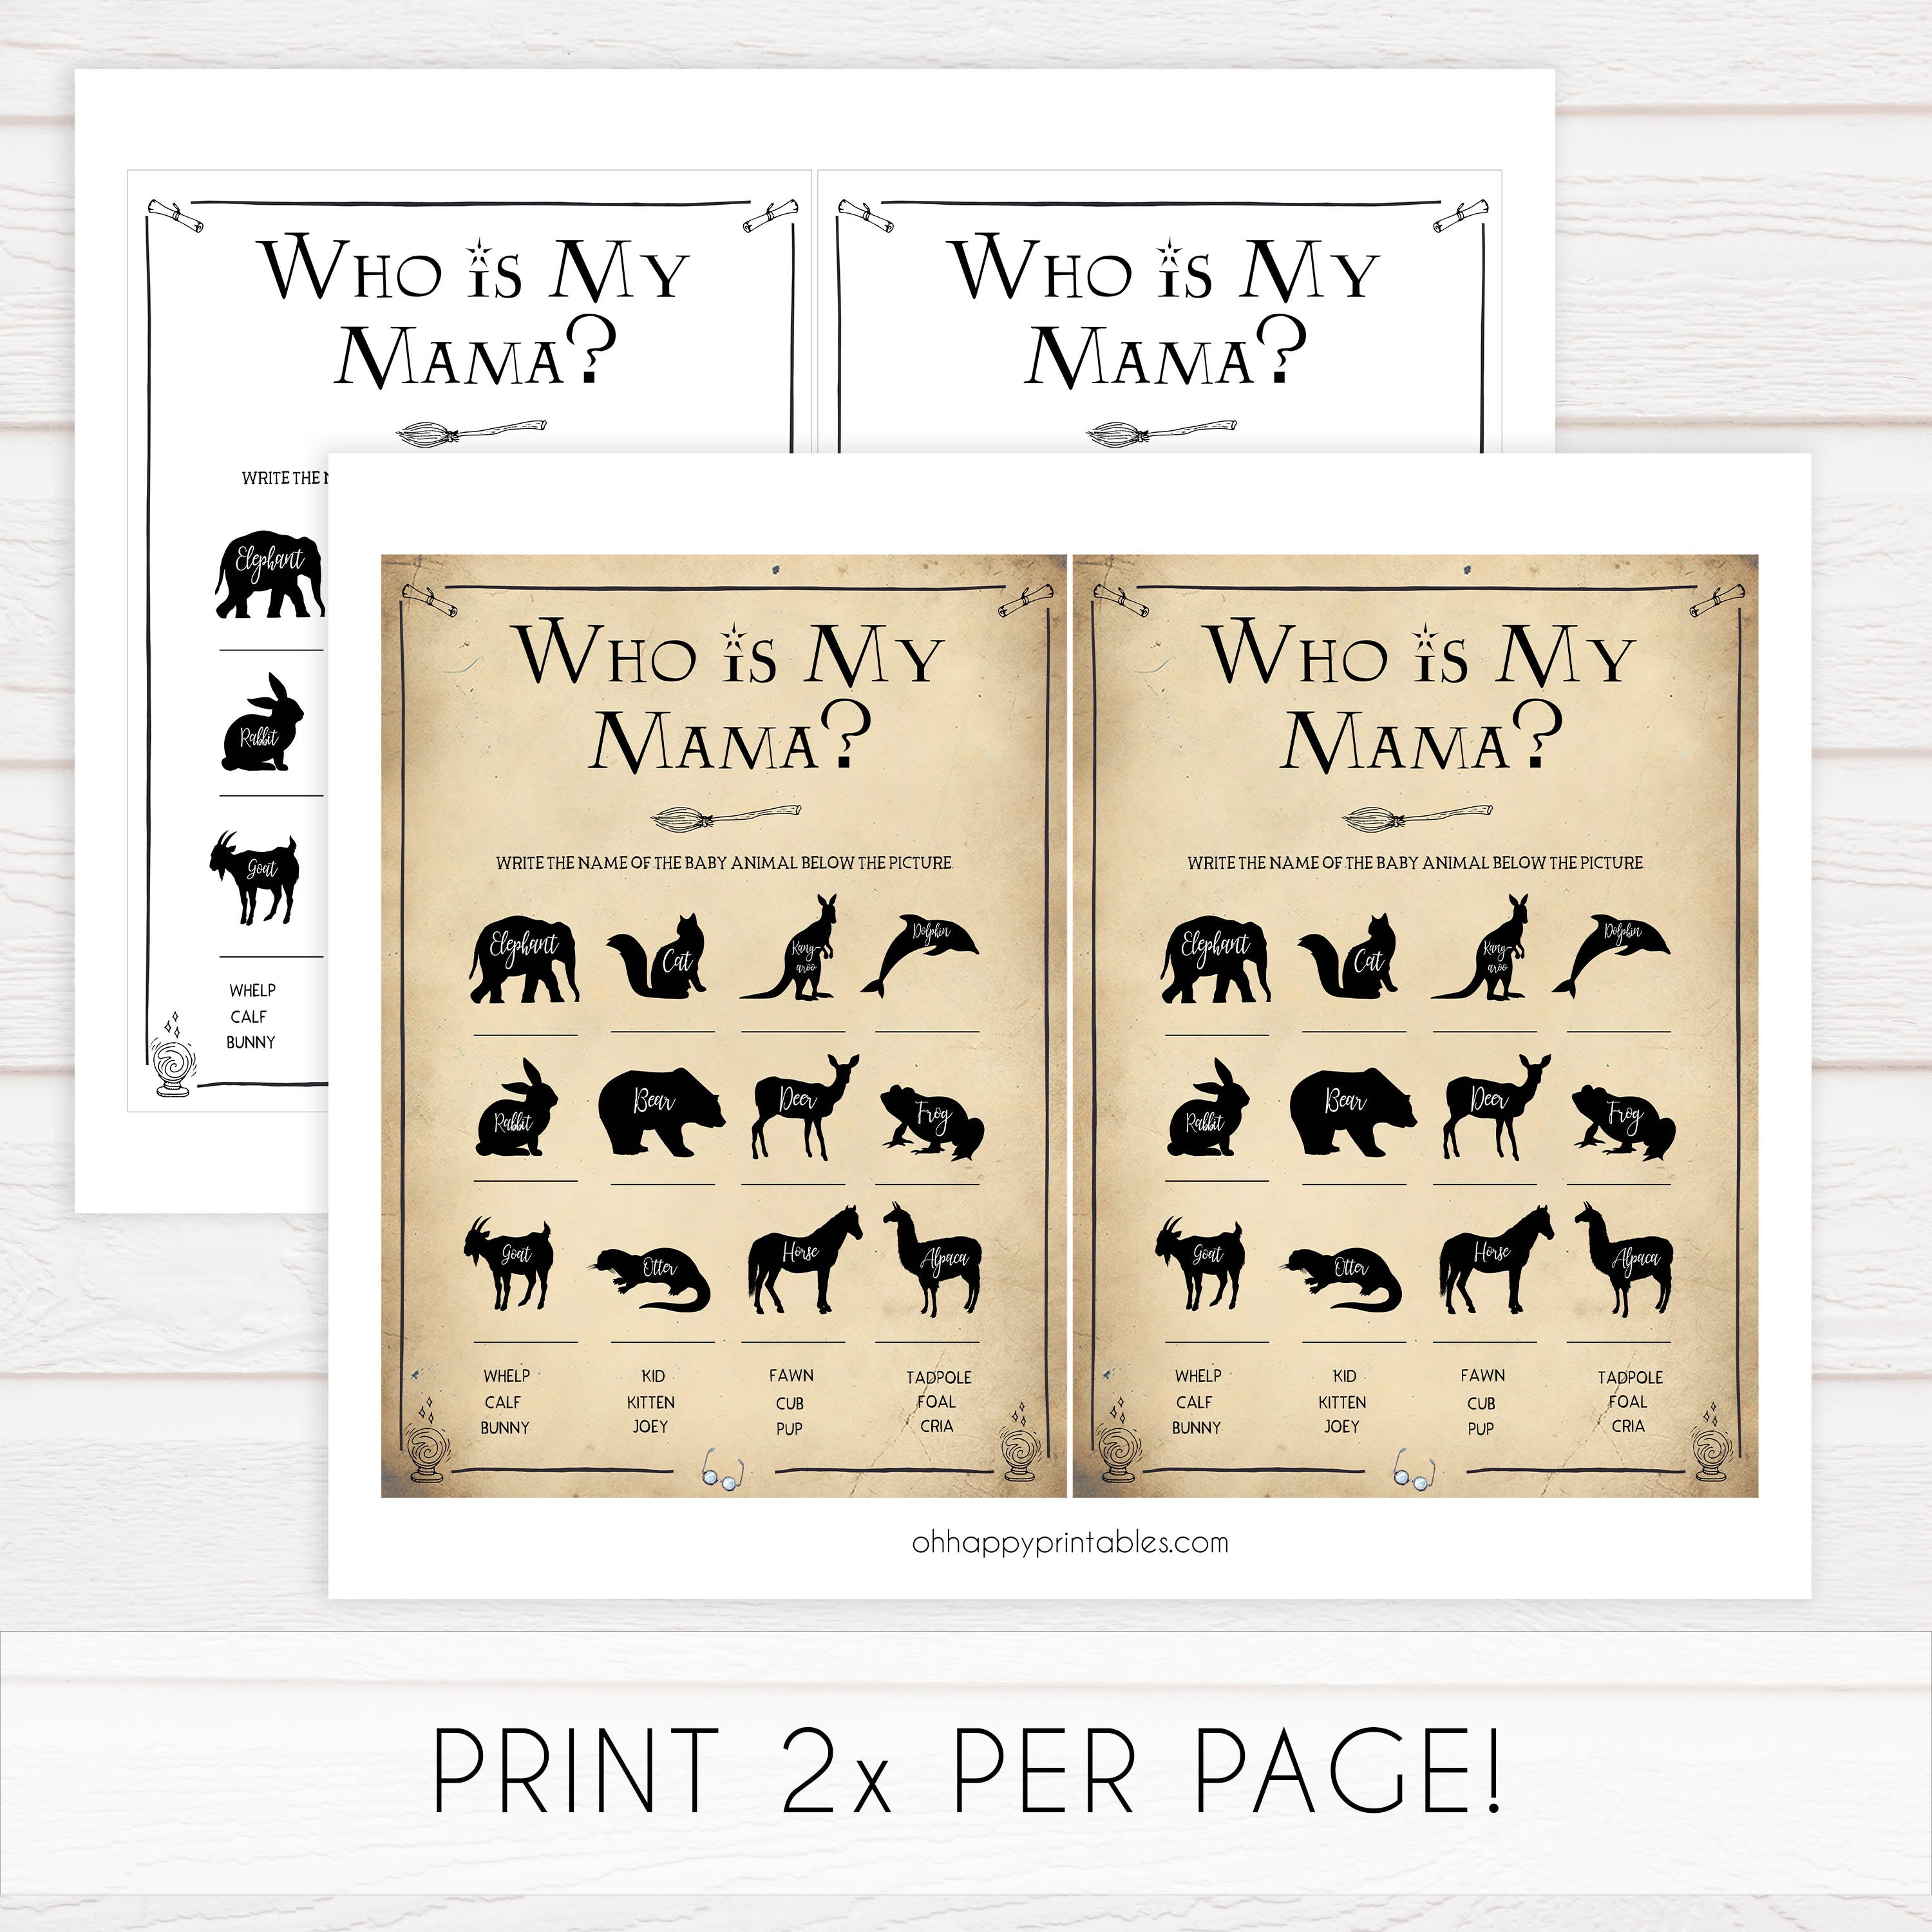 Who is My Mama Baby Game, Wizard baby shower games, printable baby shower games, Harry Potter baby games, Harry Potter baby shower, fun baby shower games,  fun baby ideas